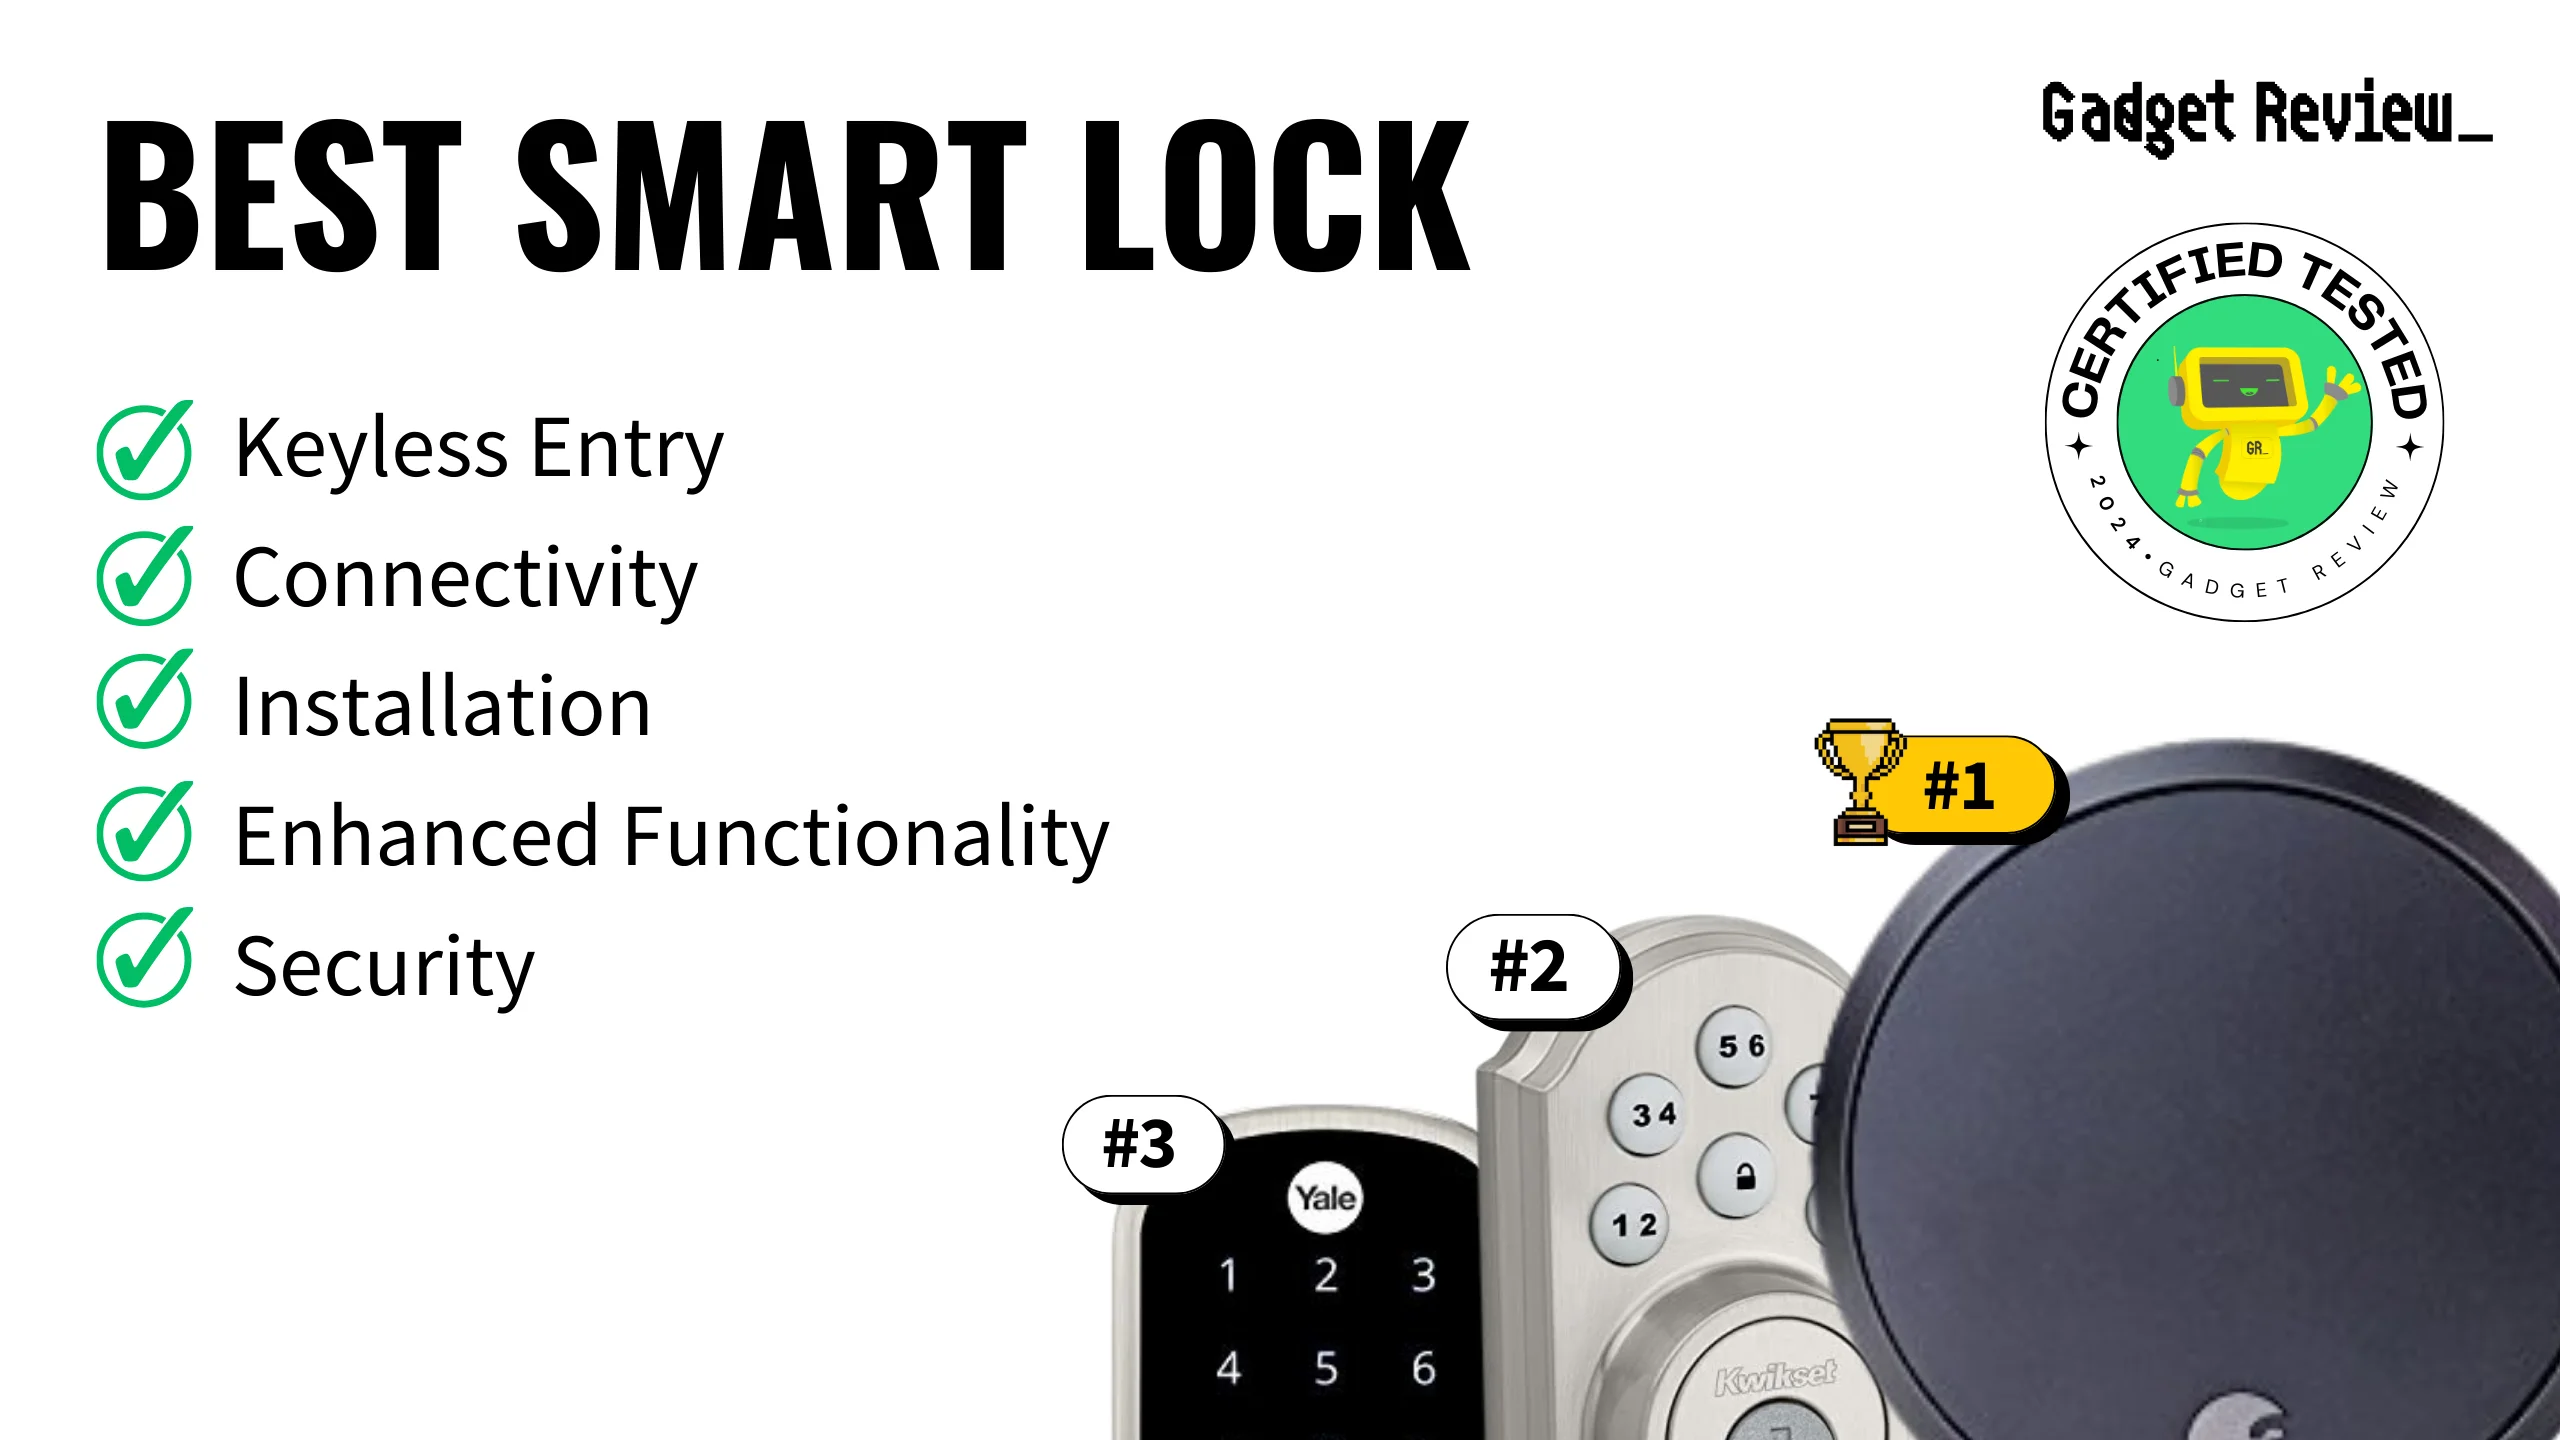 best smart lock guide that shows the top best home appliance model